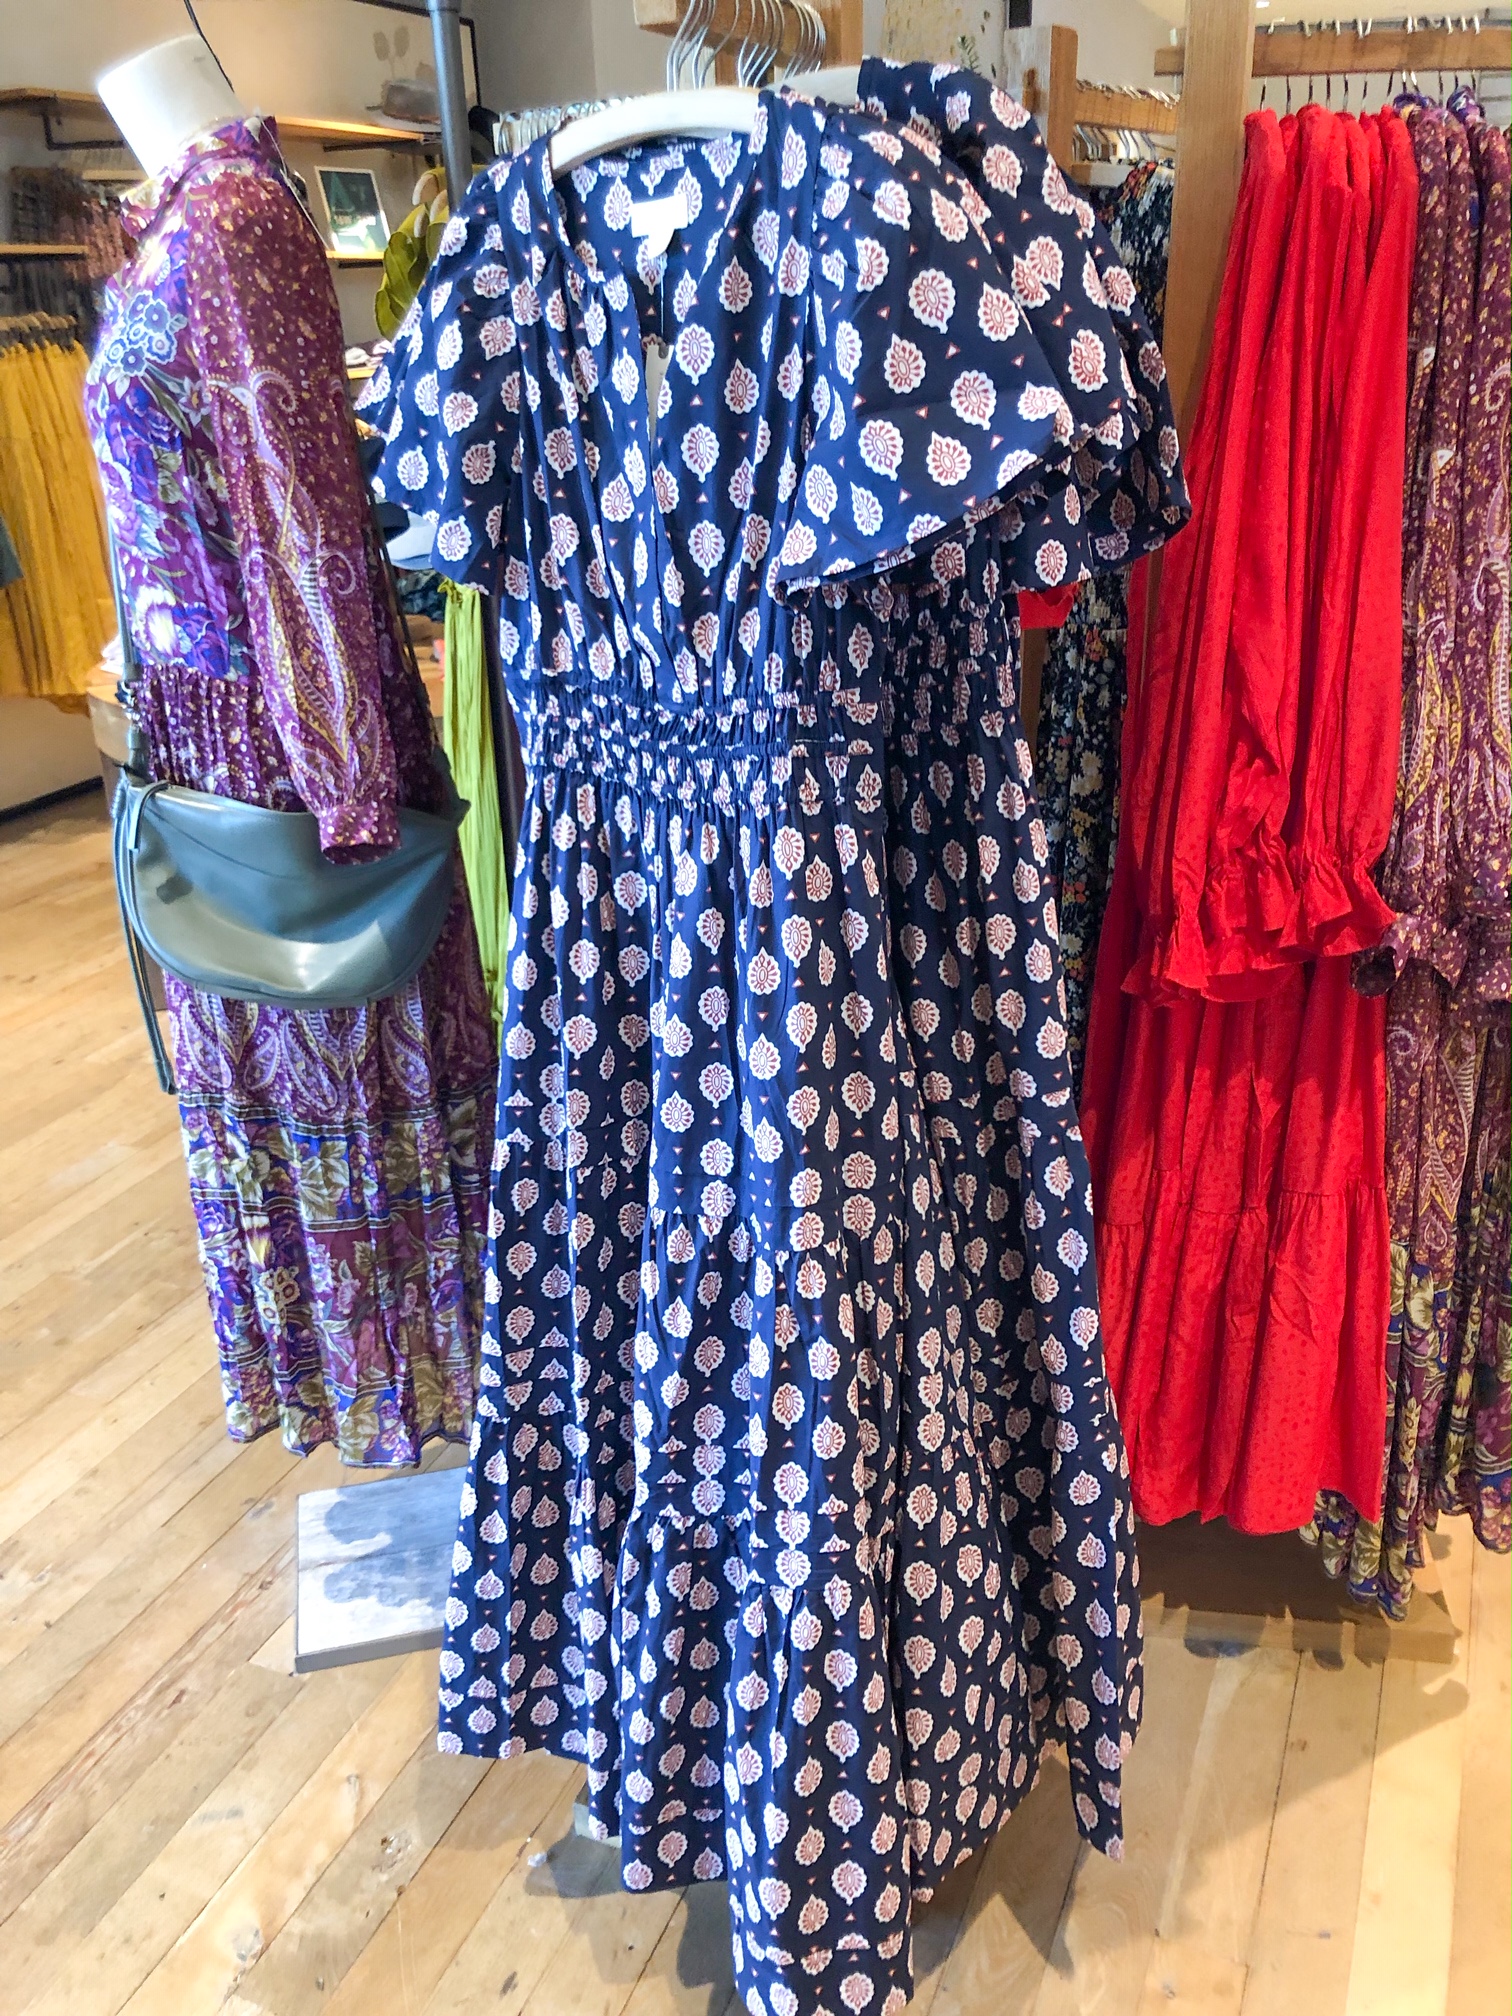 Anthropologie Try On + 20% Off This Weekend Only! - The Double Take Girls